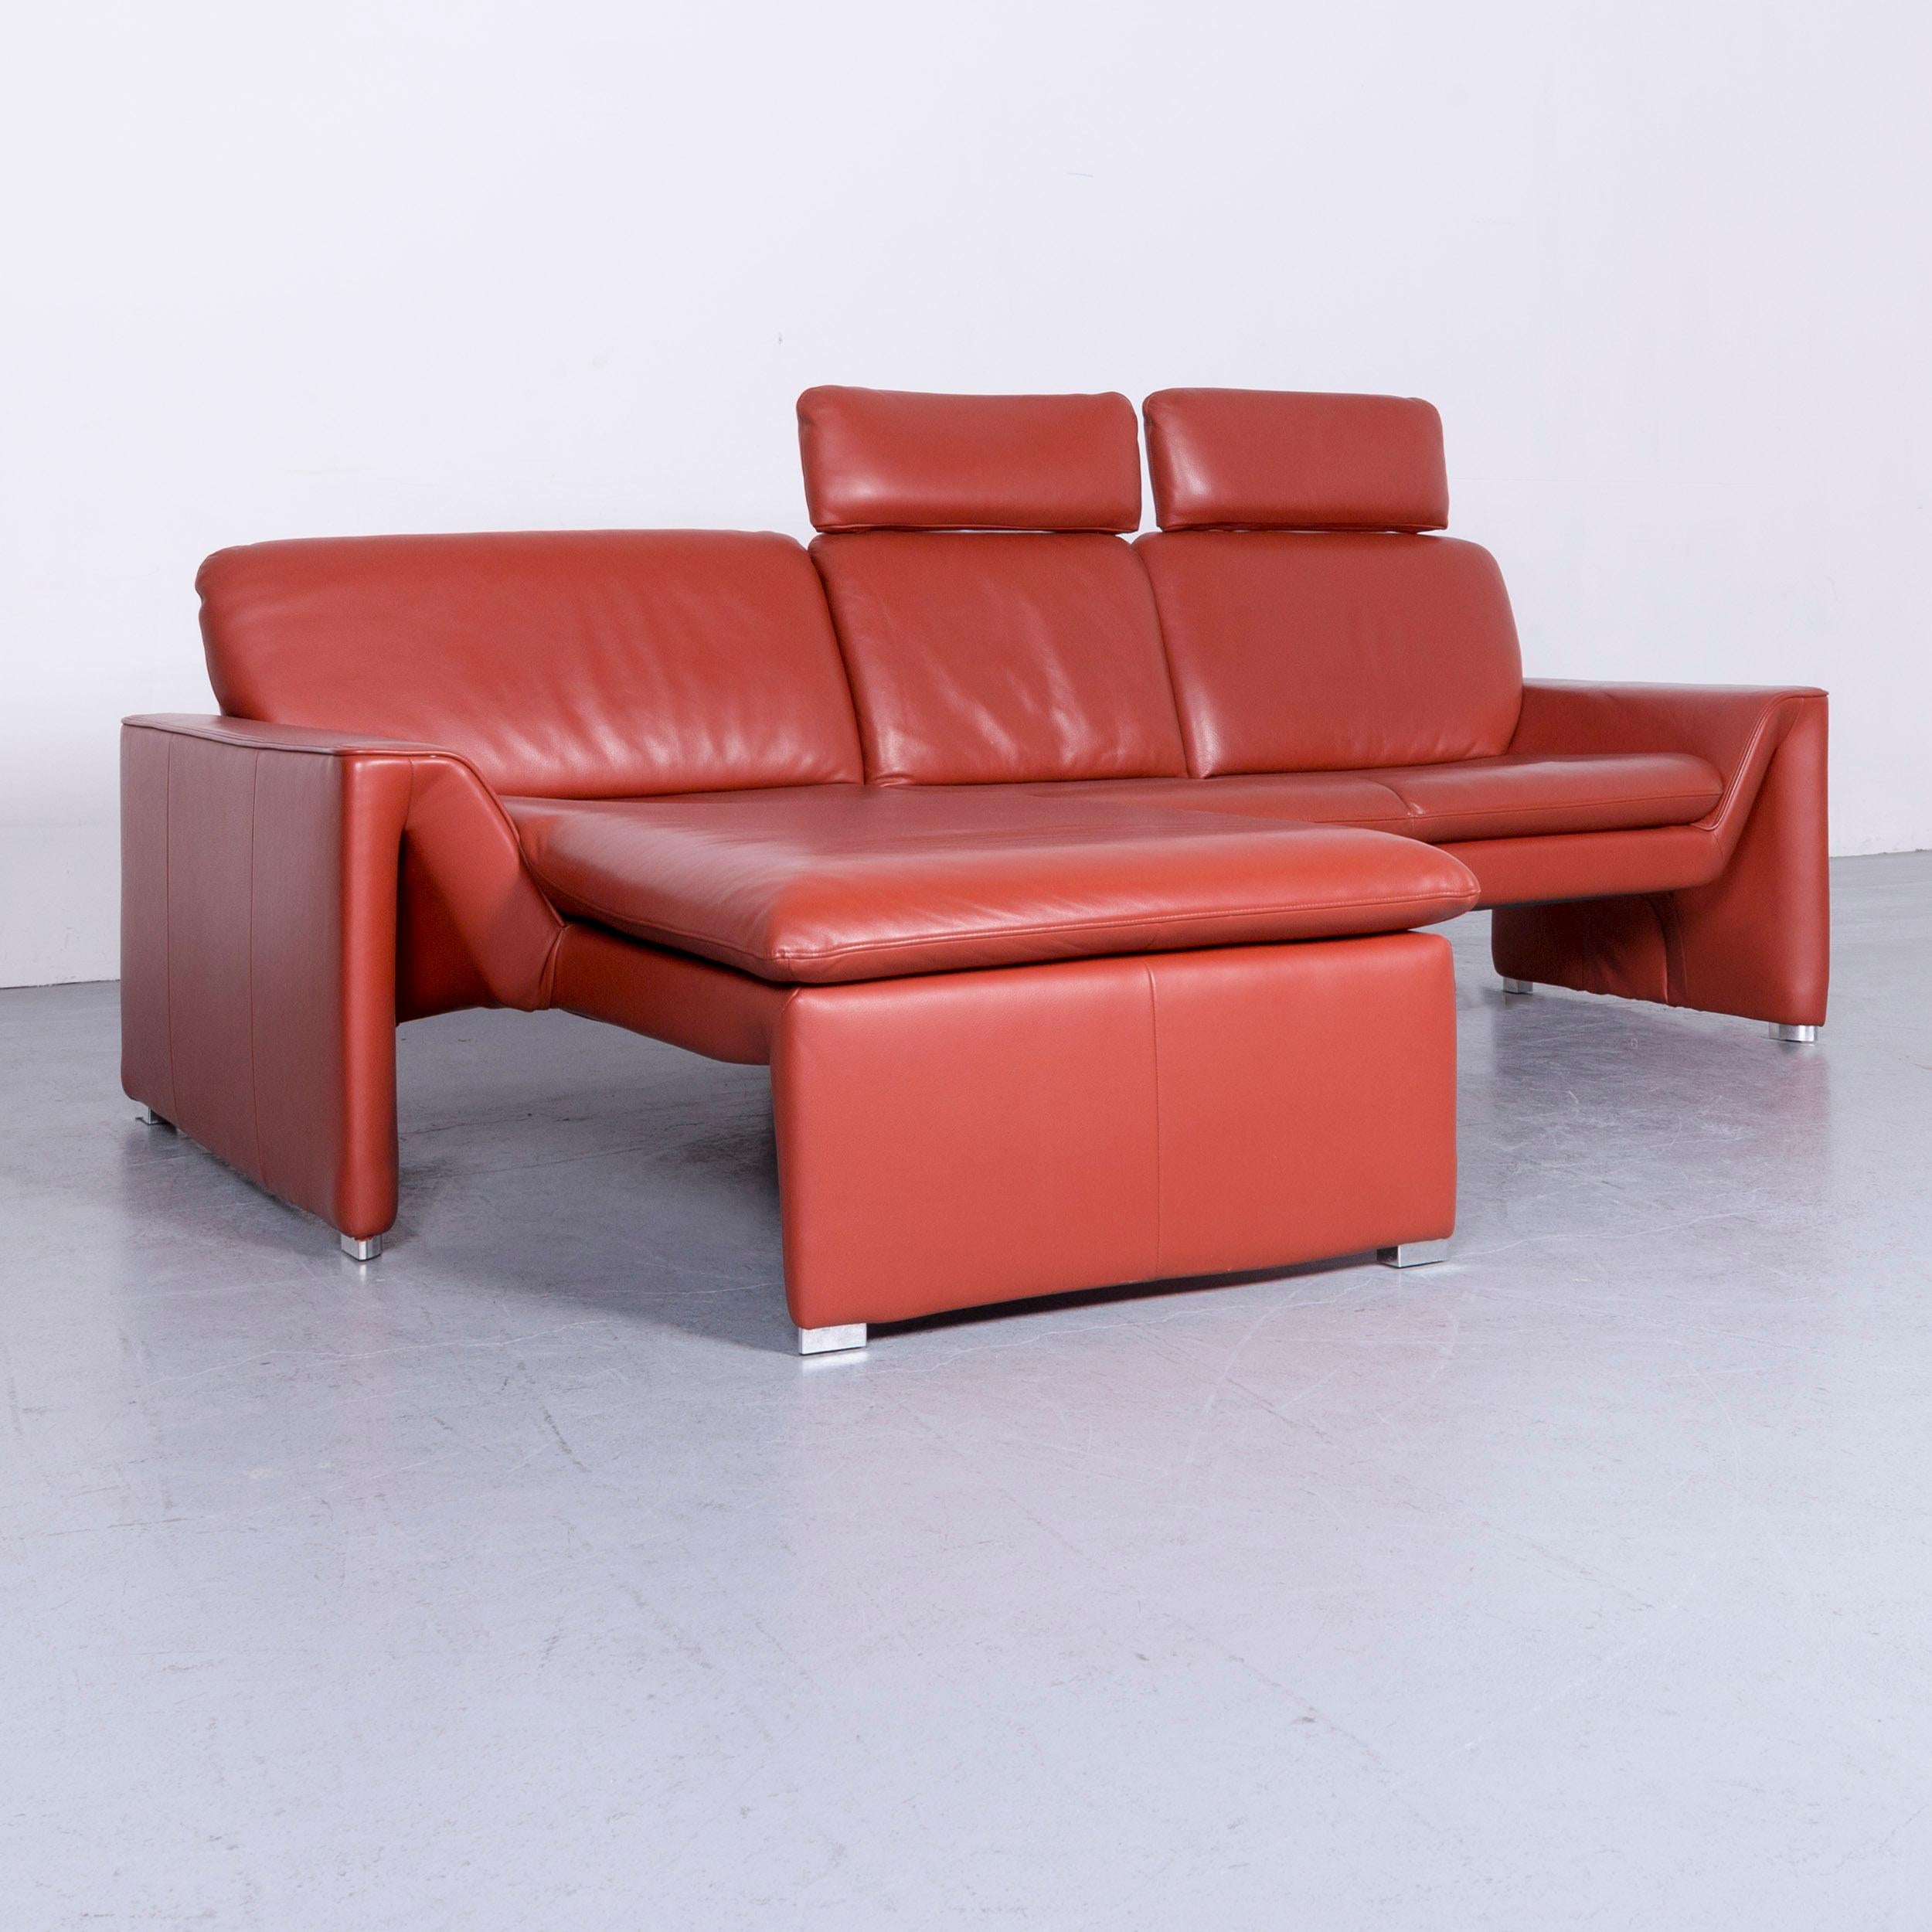 We bring to you a Laauser Corvus designer sofa corner-sofa footstool set leather red couch.